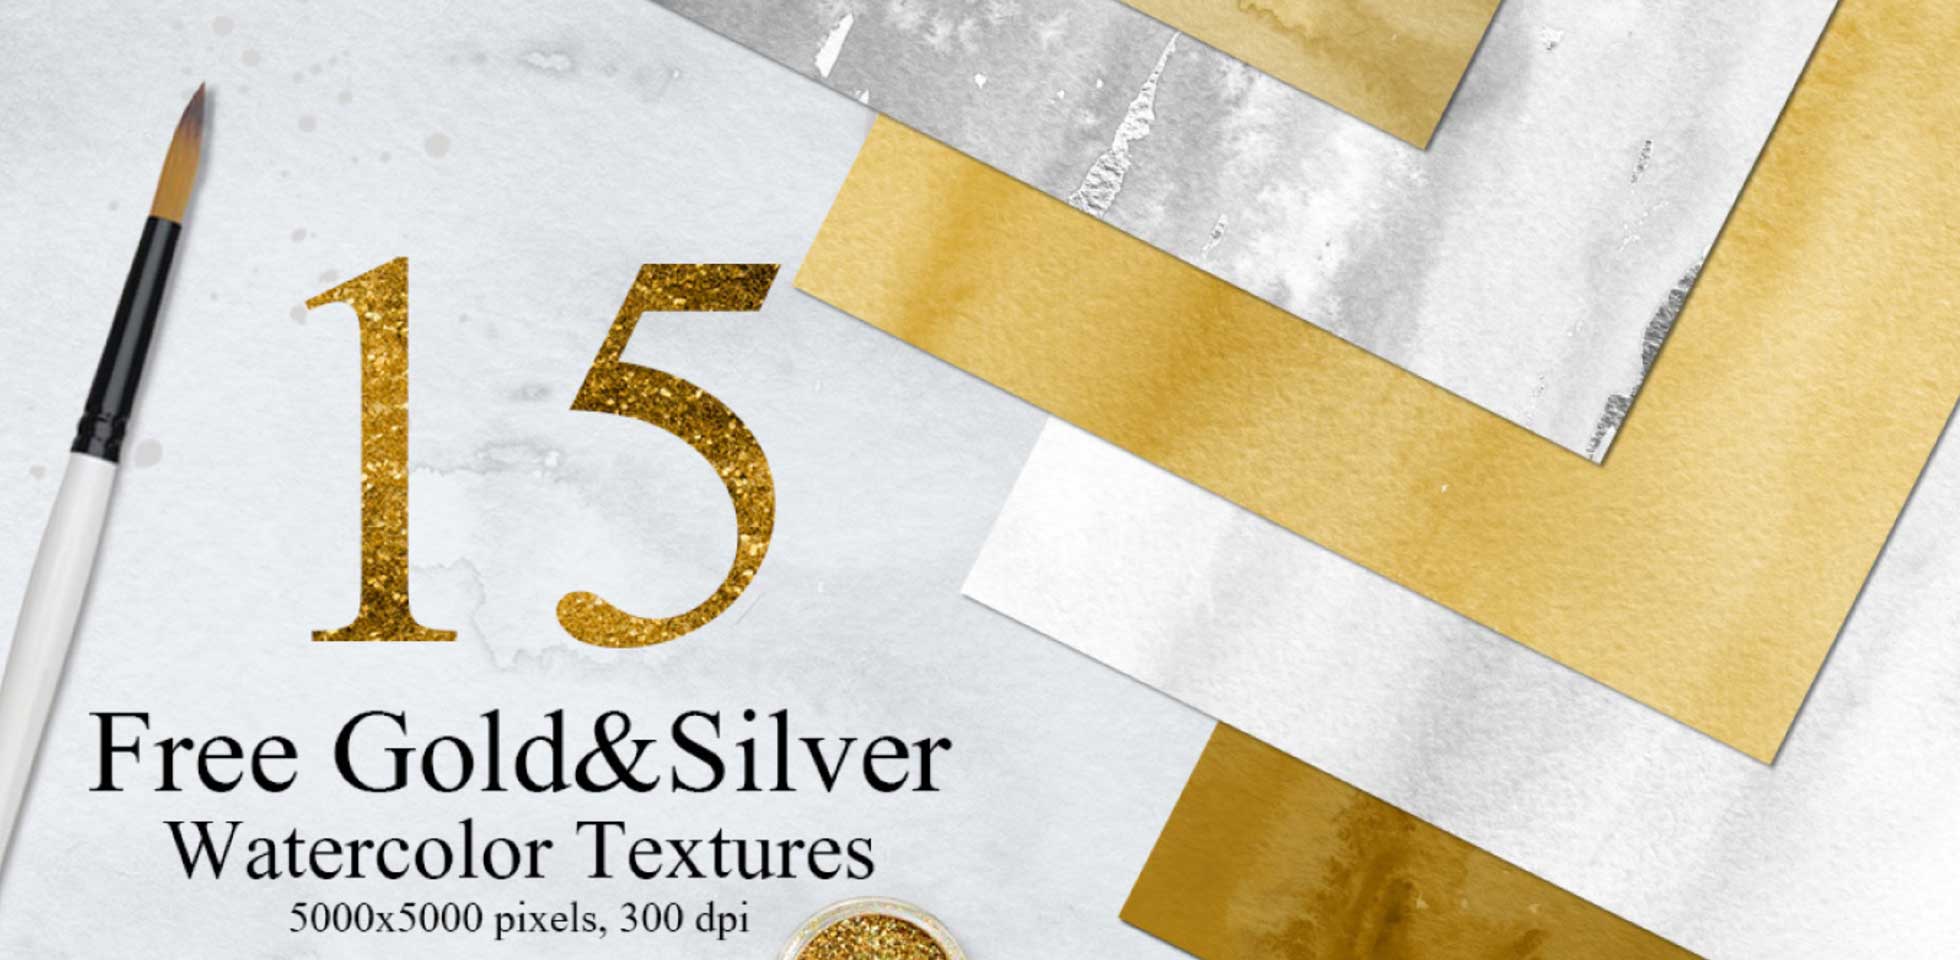 Free Download: 15 Gold & Silver Watercolor Textures